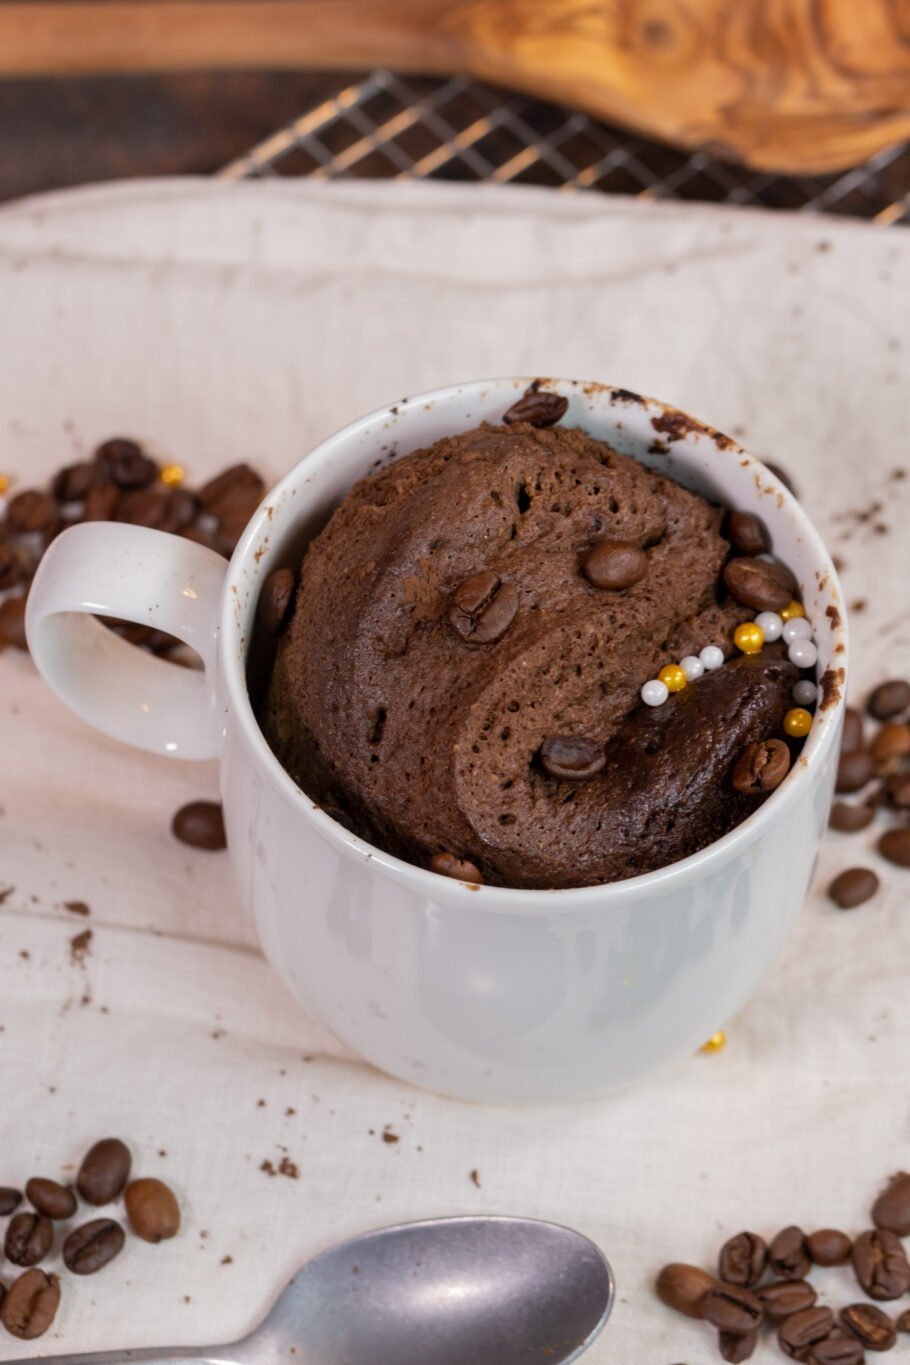 https://media.theproteinchef.co/wp-content/uploads/2020/06/Low-Carb-Cold-Brew-Mug-Cake-Close-910x1365.jpg